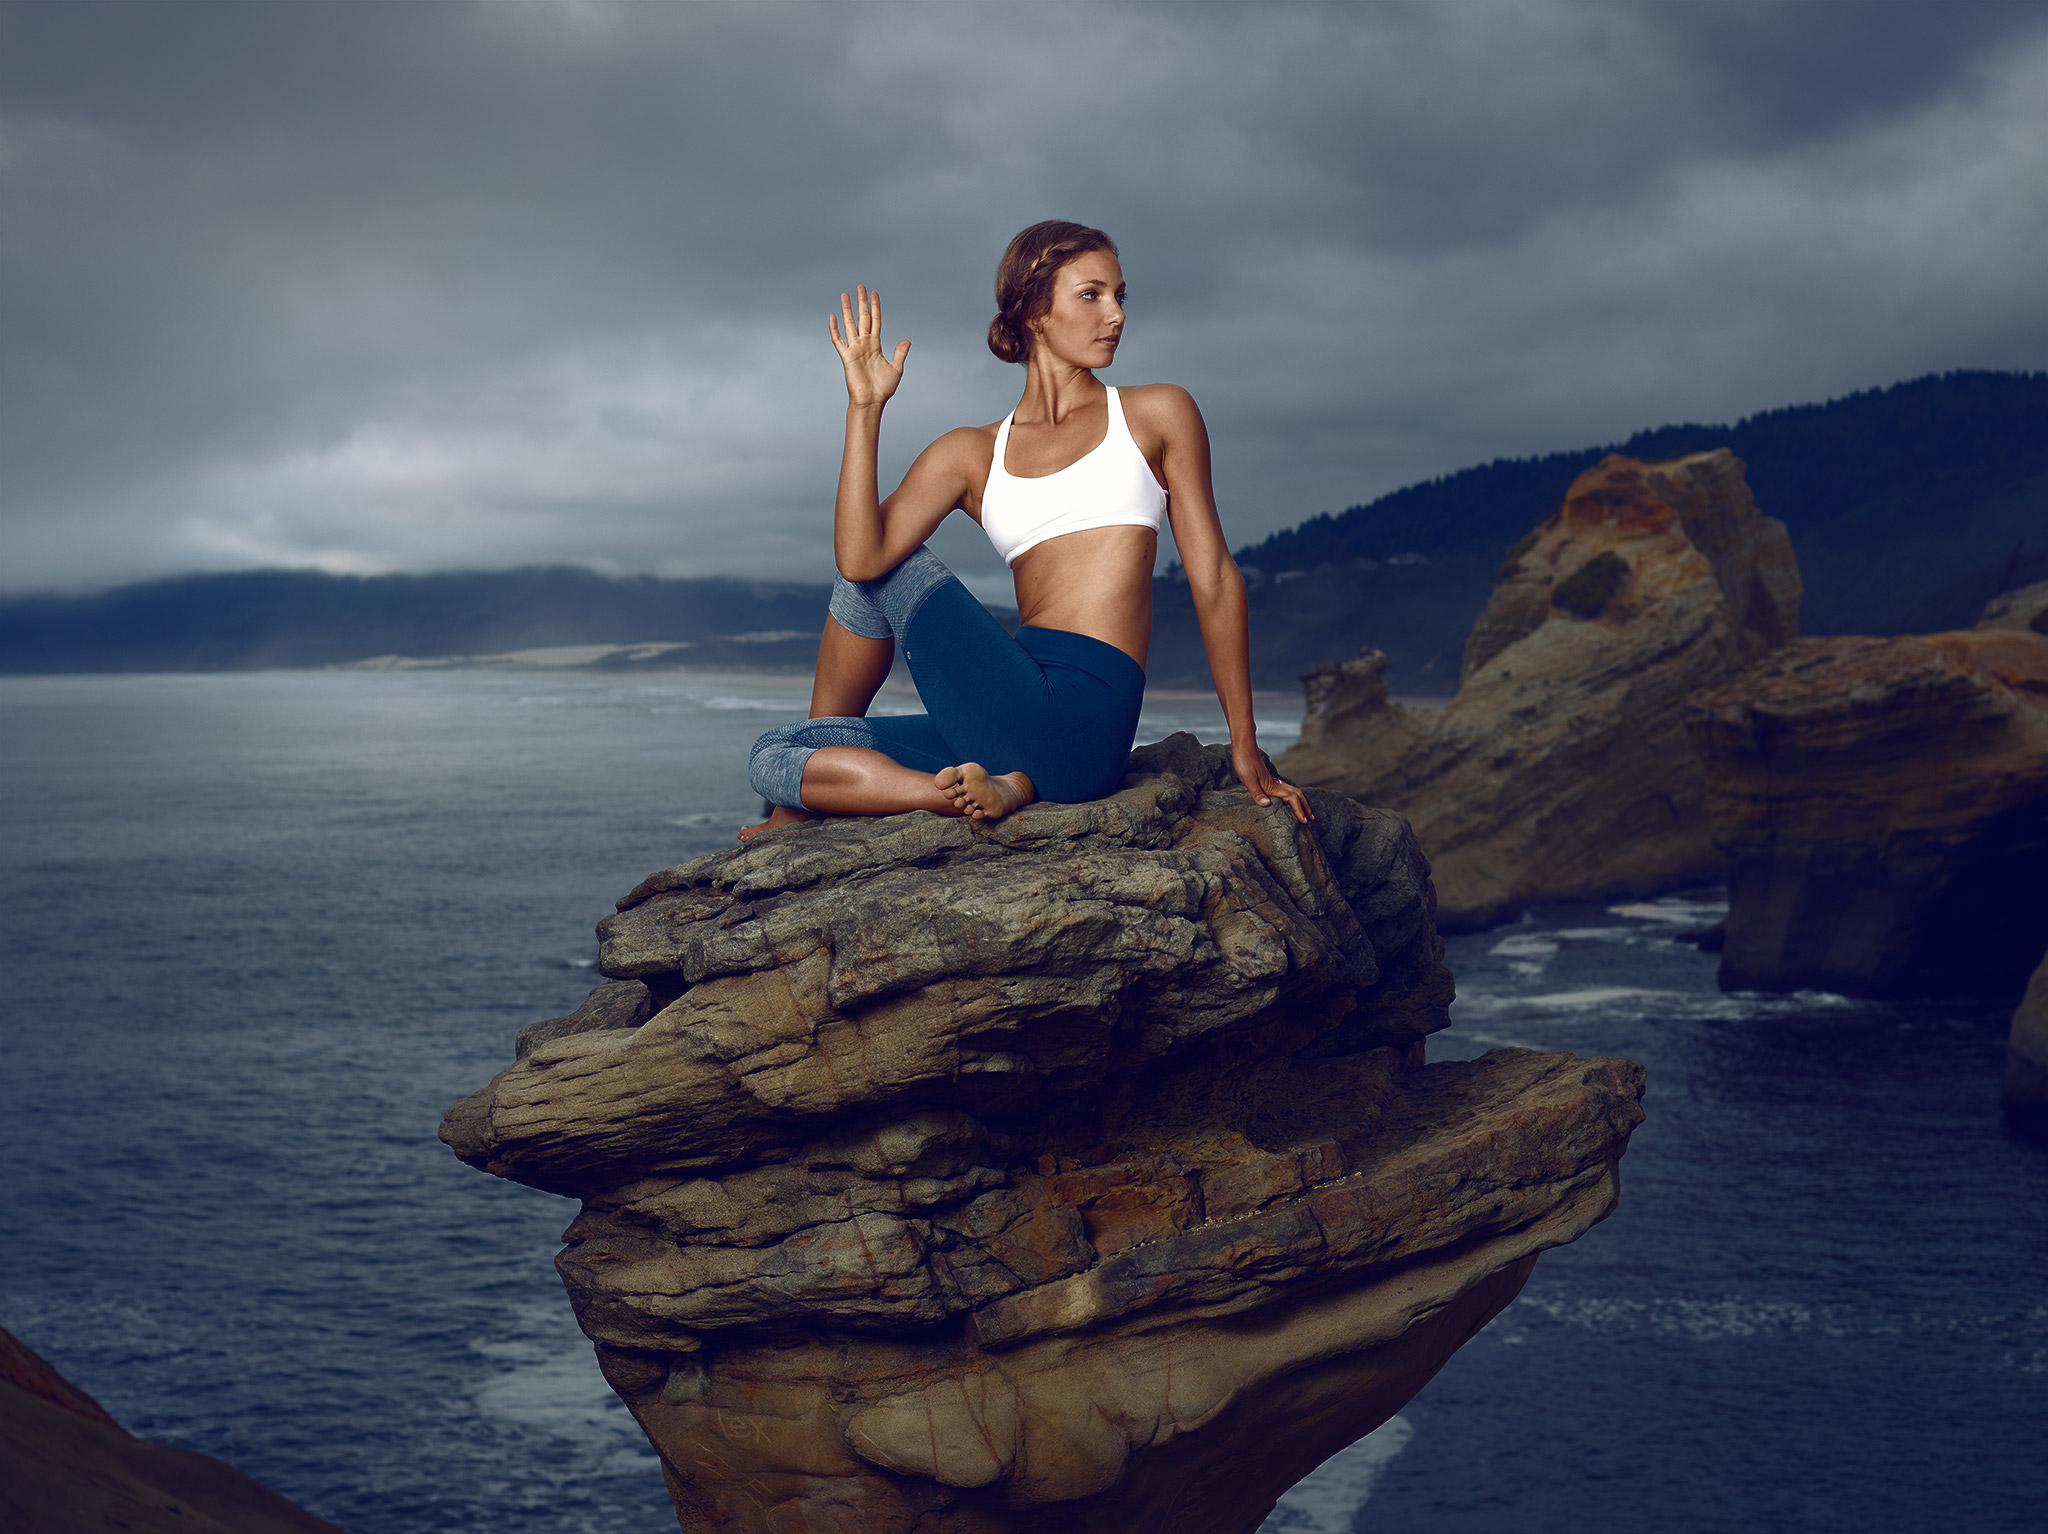 Model Practices Yoga on Rock | Zach Ancell Photography